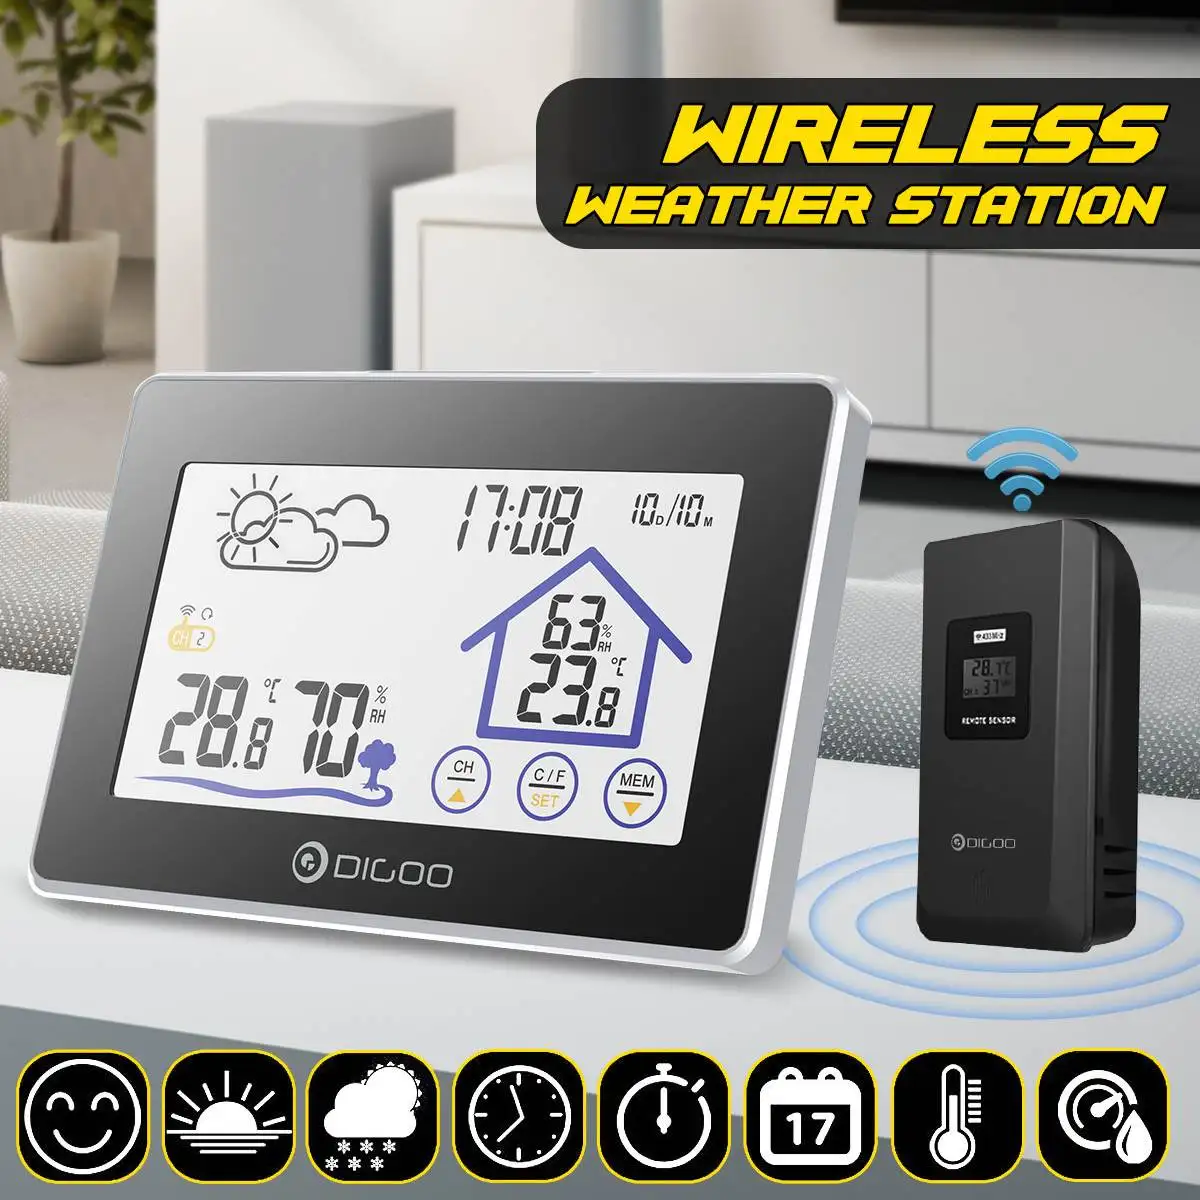 

Digoo DG-TH8380 Wireless Touch Outdoor Indoor Weather Station Forecast Sensor Thermometer Hygrometer Meter Calendar Backlight